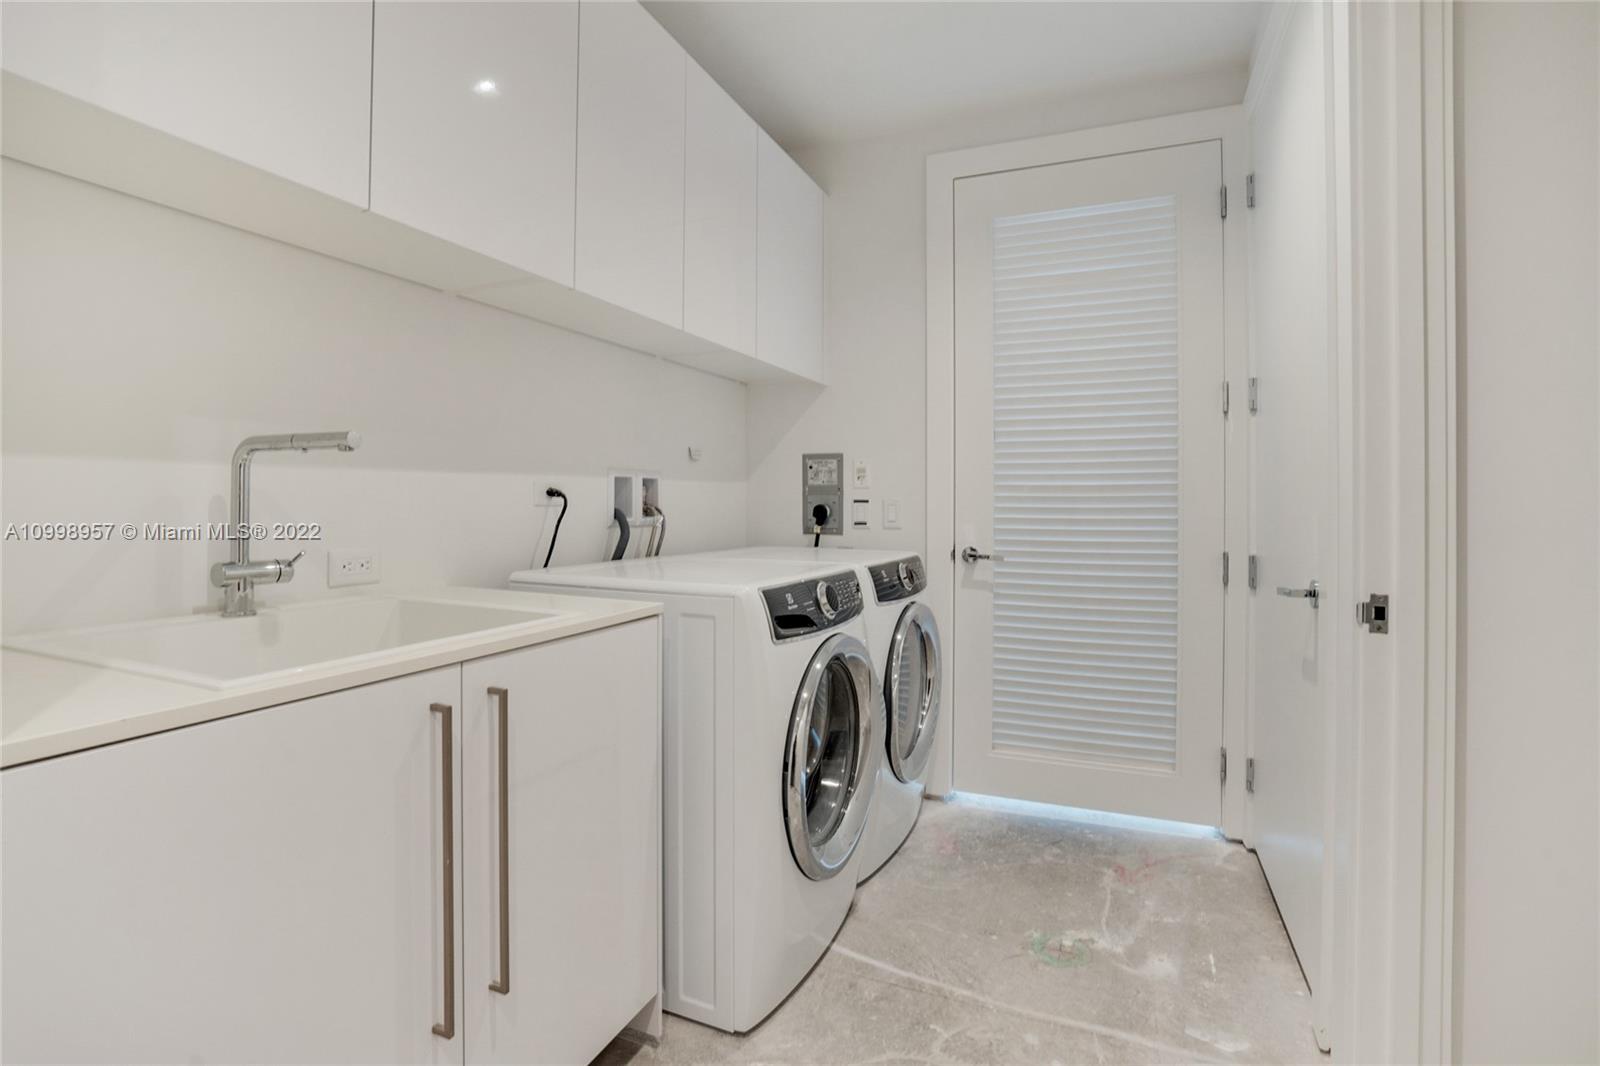 Laundry Room, all white with washer and dryer separated